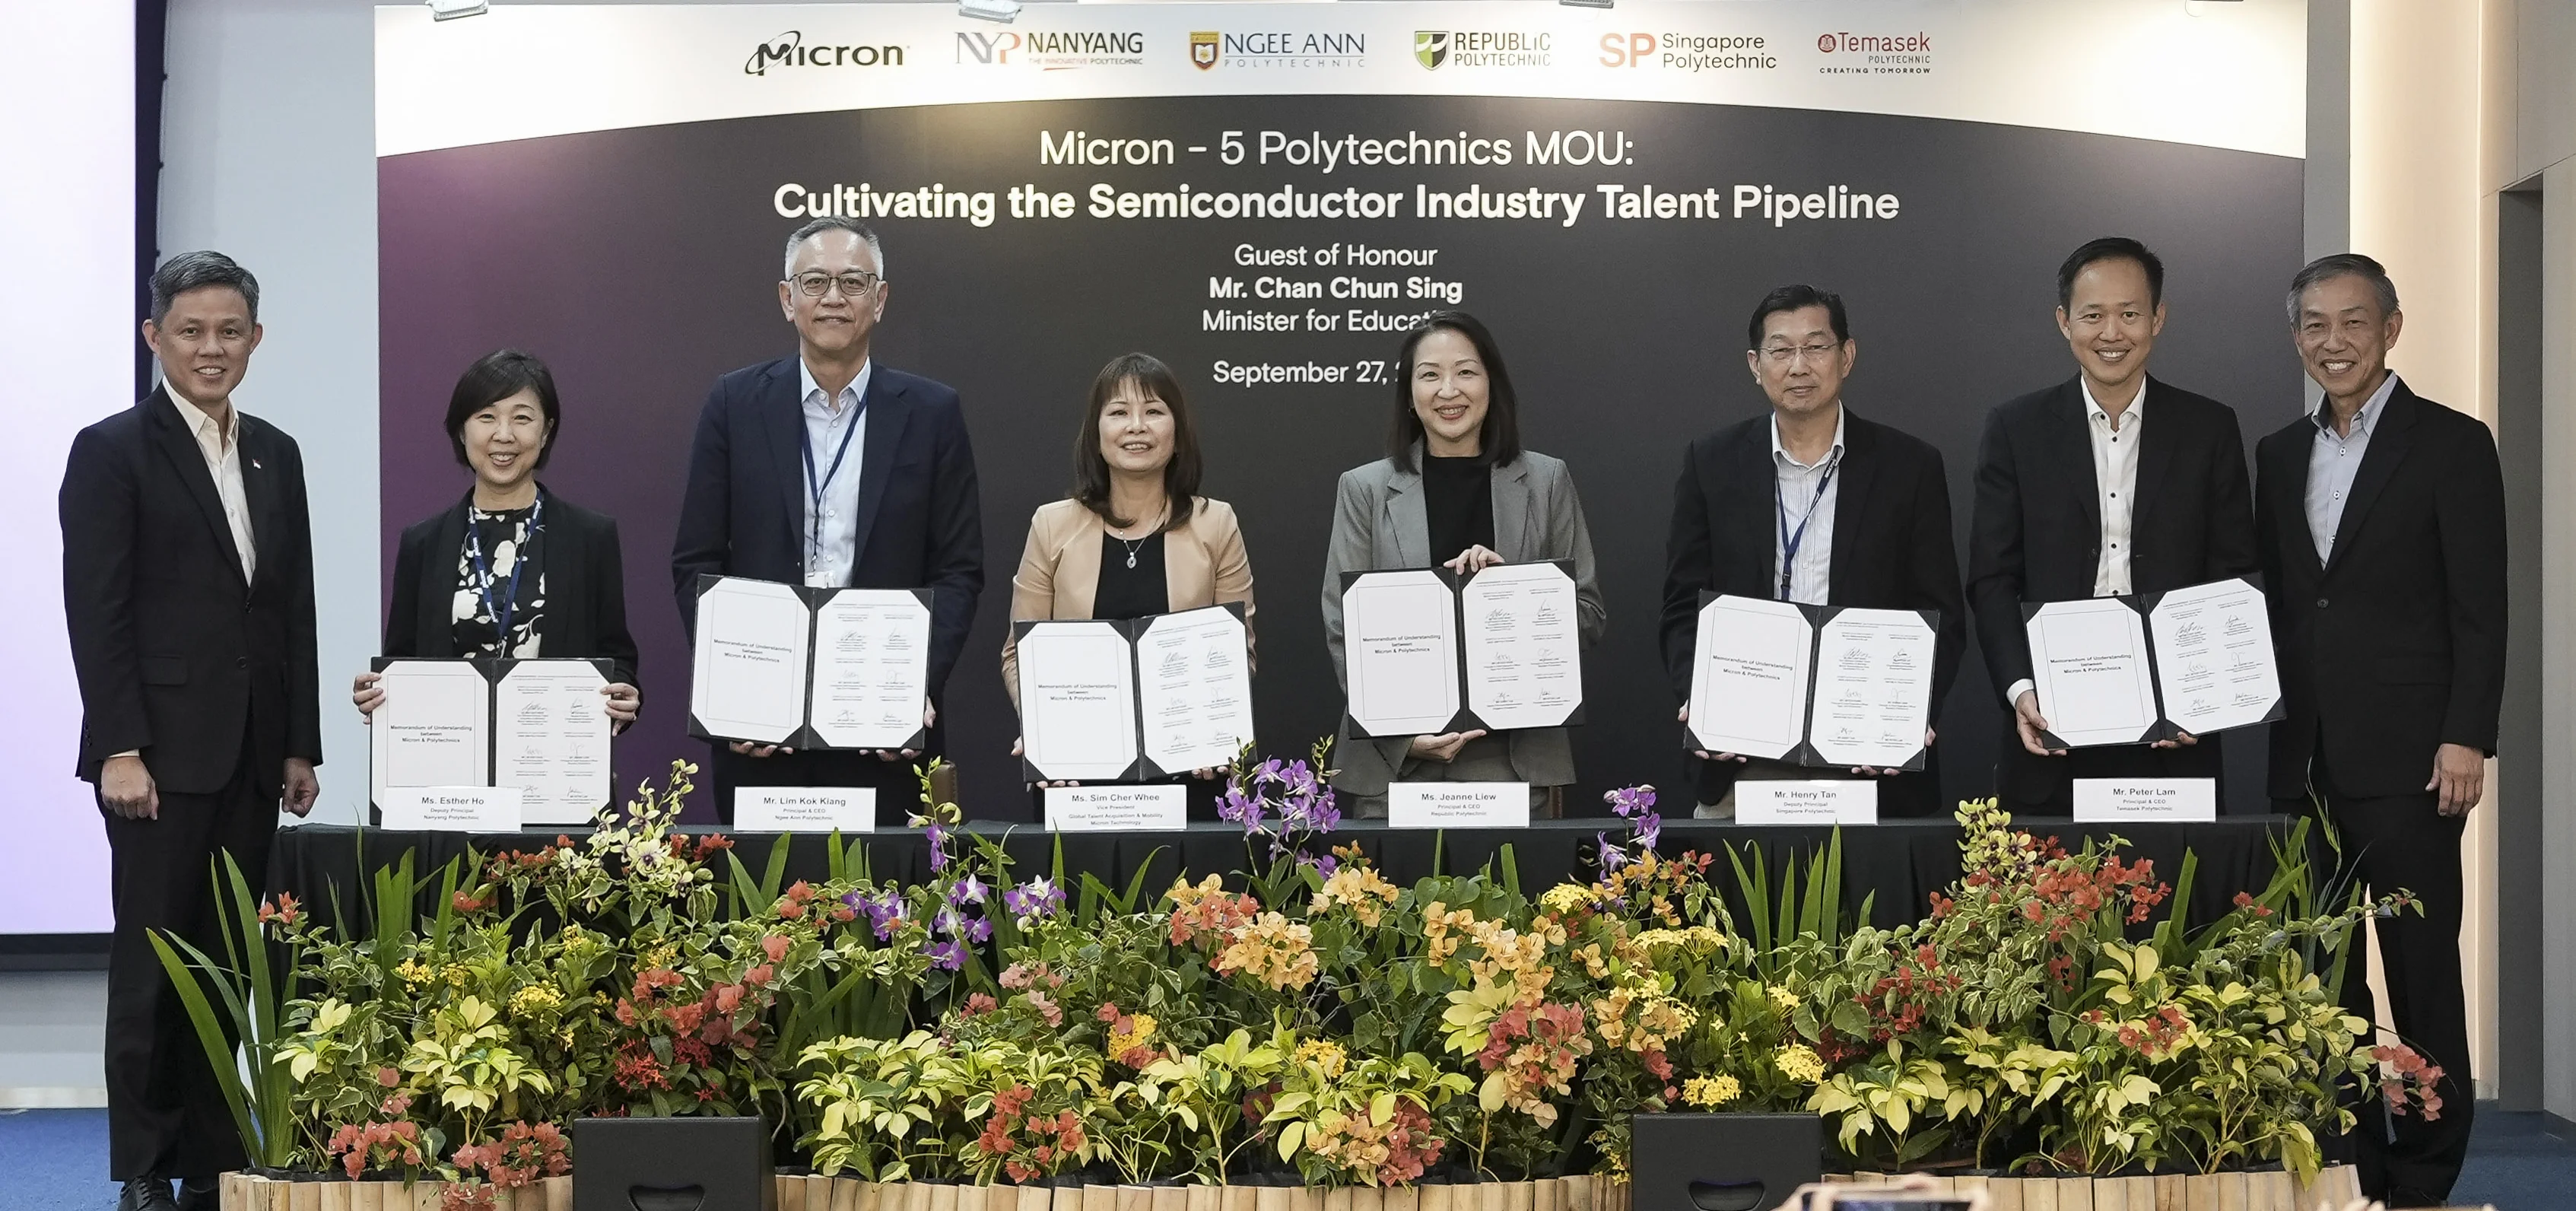 Micron cultivates engineering and technician talent pipeline in Singapore